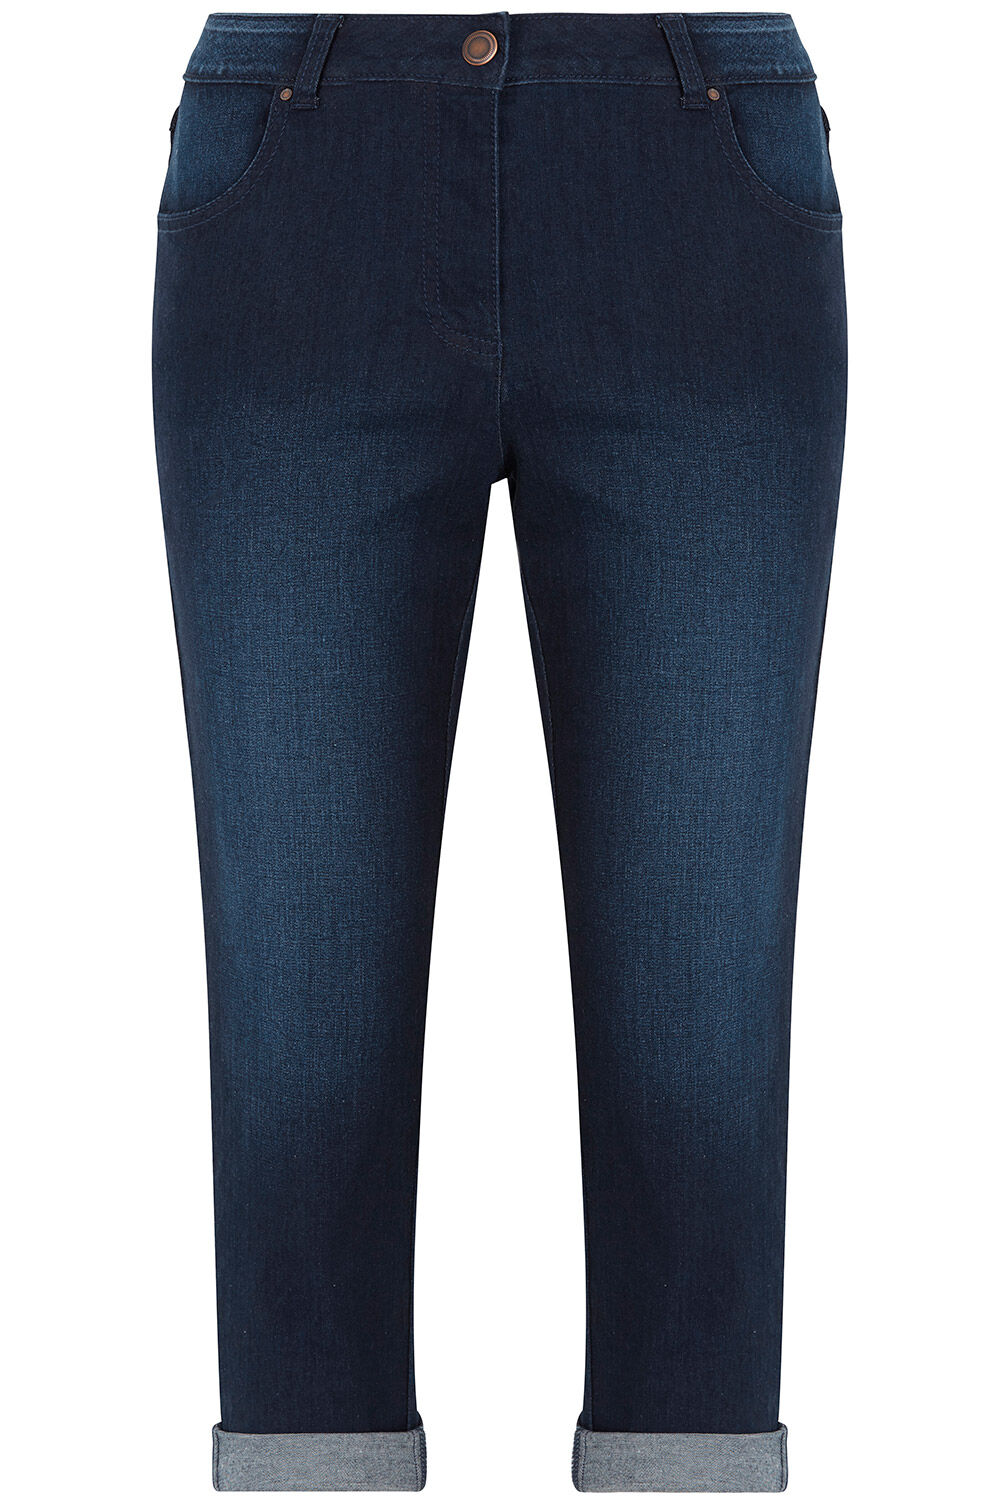 Woman BLUE Cropped denim trousers with stretch waistband  Cotton¤Synthetic¤Elastane NARCY | Afibel